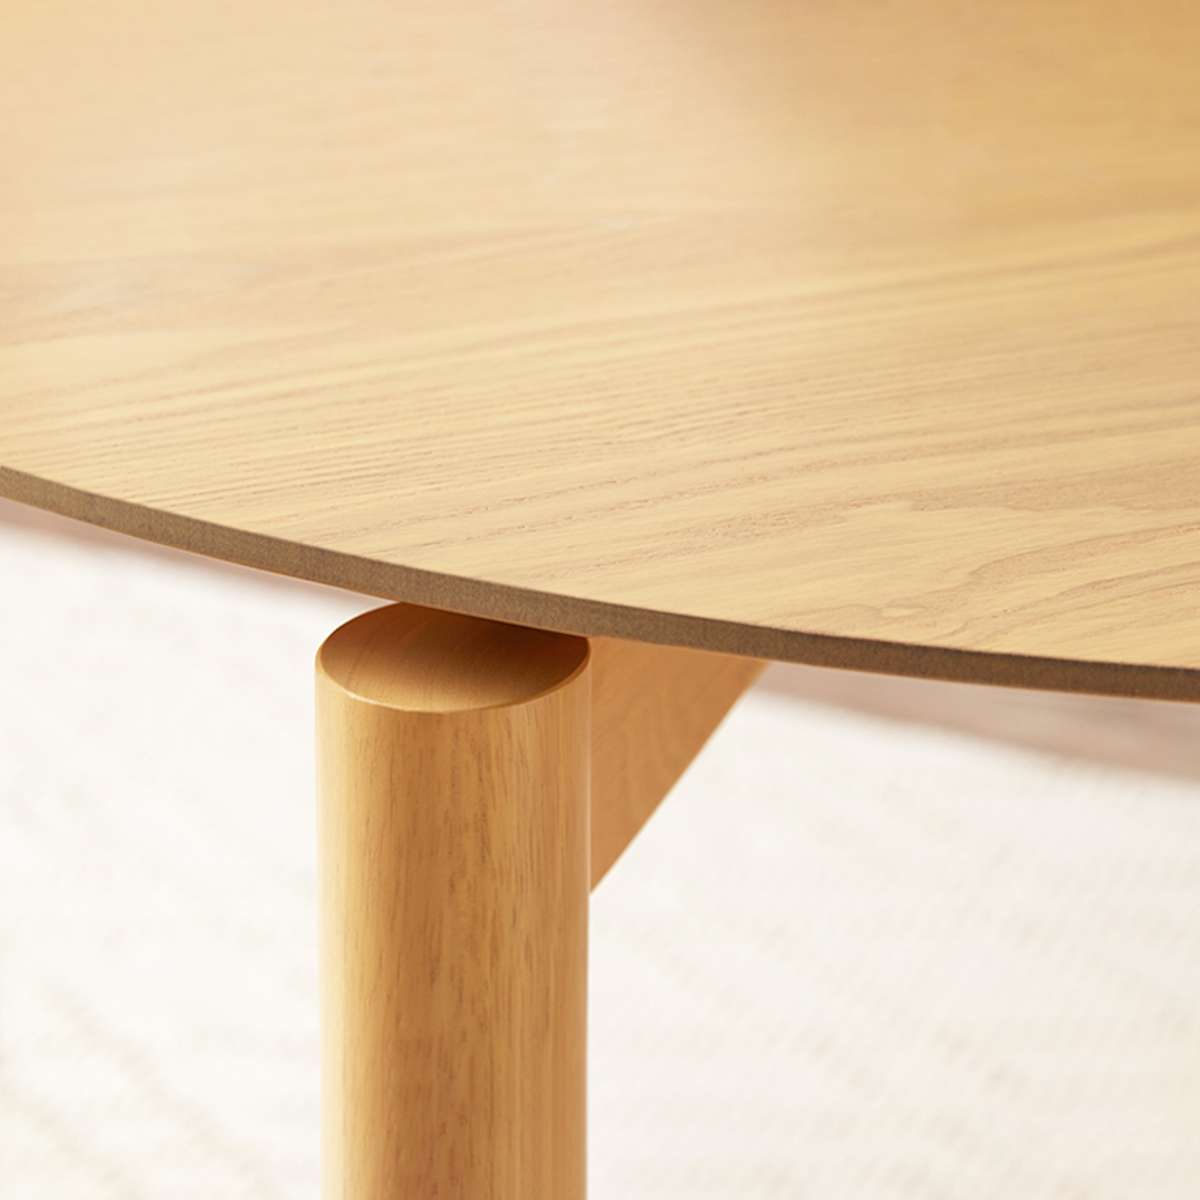 Leon 4 Seater Dining Table - Natural